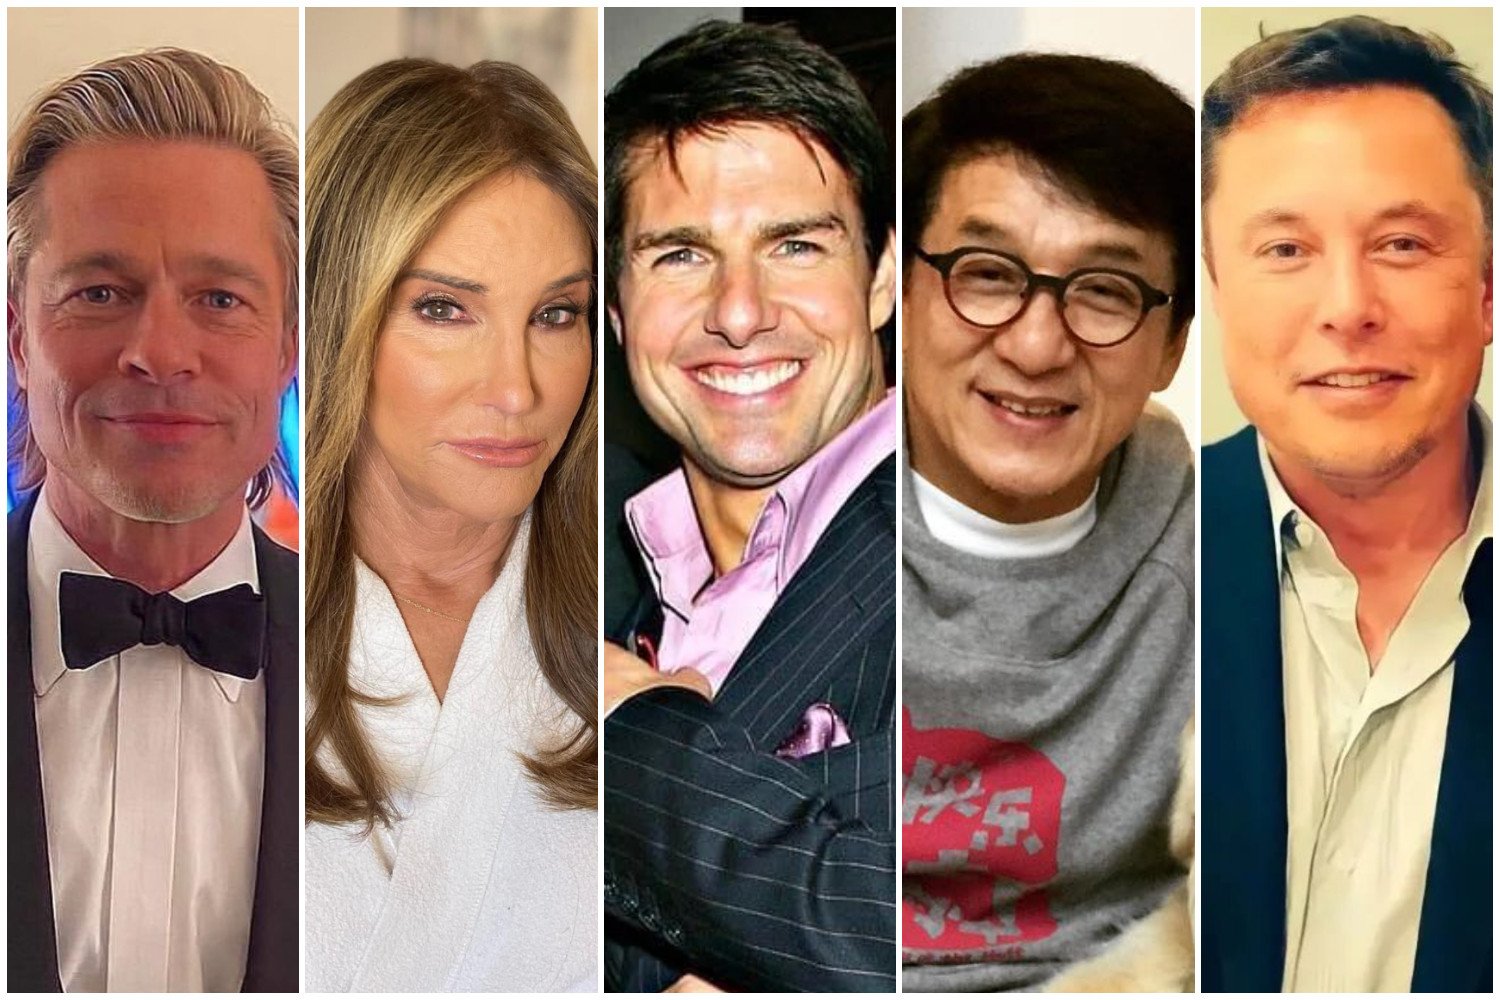 Brad Pitt, Caitlyn Jenner, Tom Cruise, Jackie Chan and Elon Musk all have children that don’t talk to them anymore – so what went wrong?
Photos: @bradpittofficial, @caitlynjenner, @tomcruiseofficciall, @jackiechan, @elonmusk.ab/Instagram